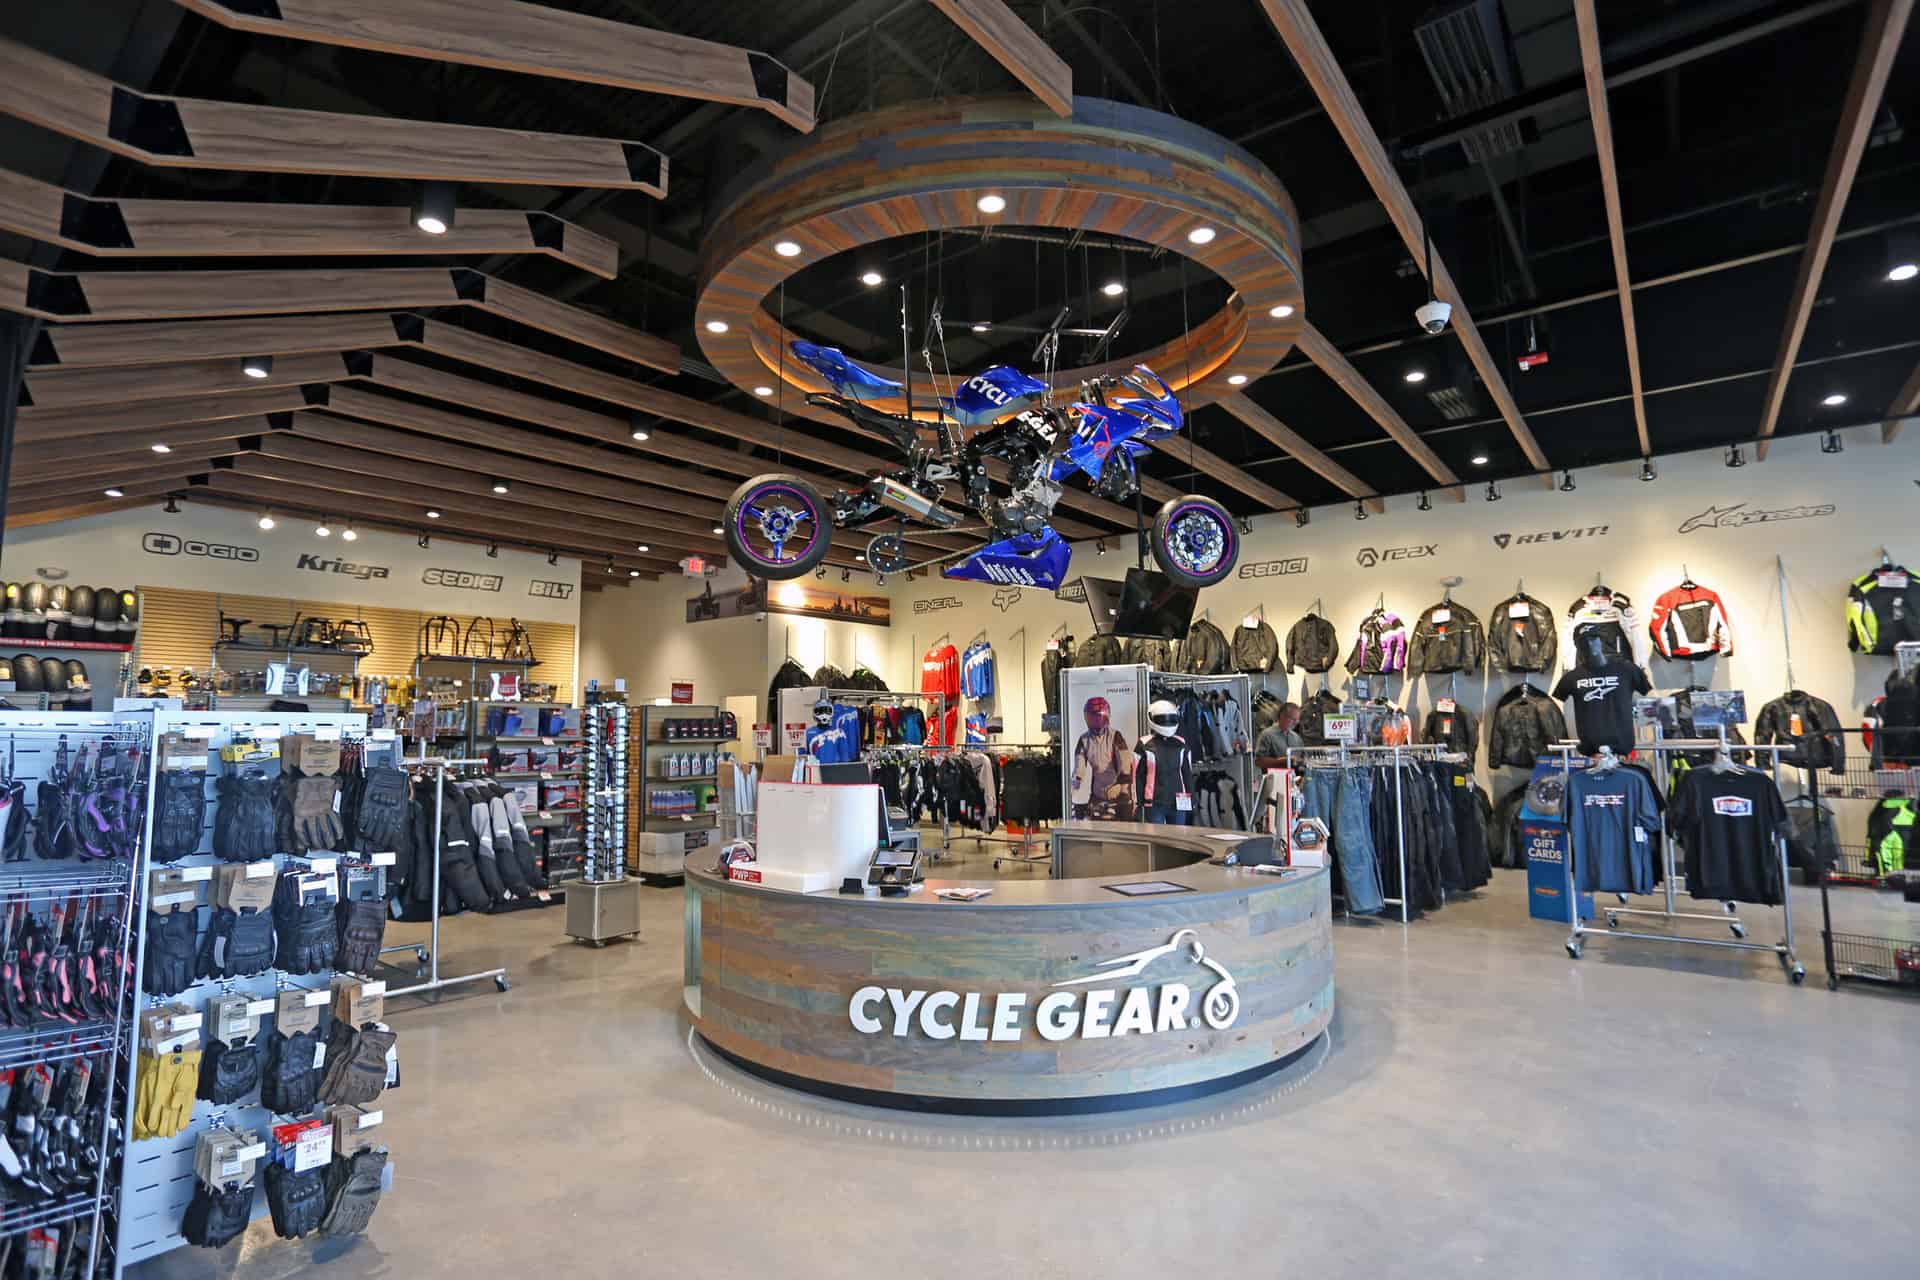 Chapman Completes Cycle Gear Store - High-Profile Monthly